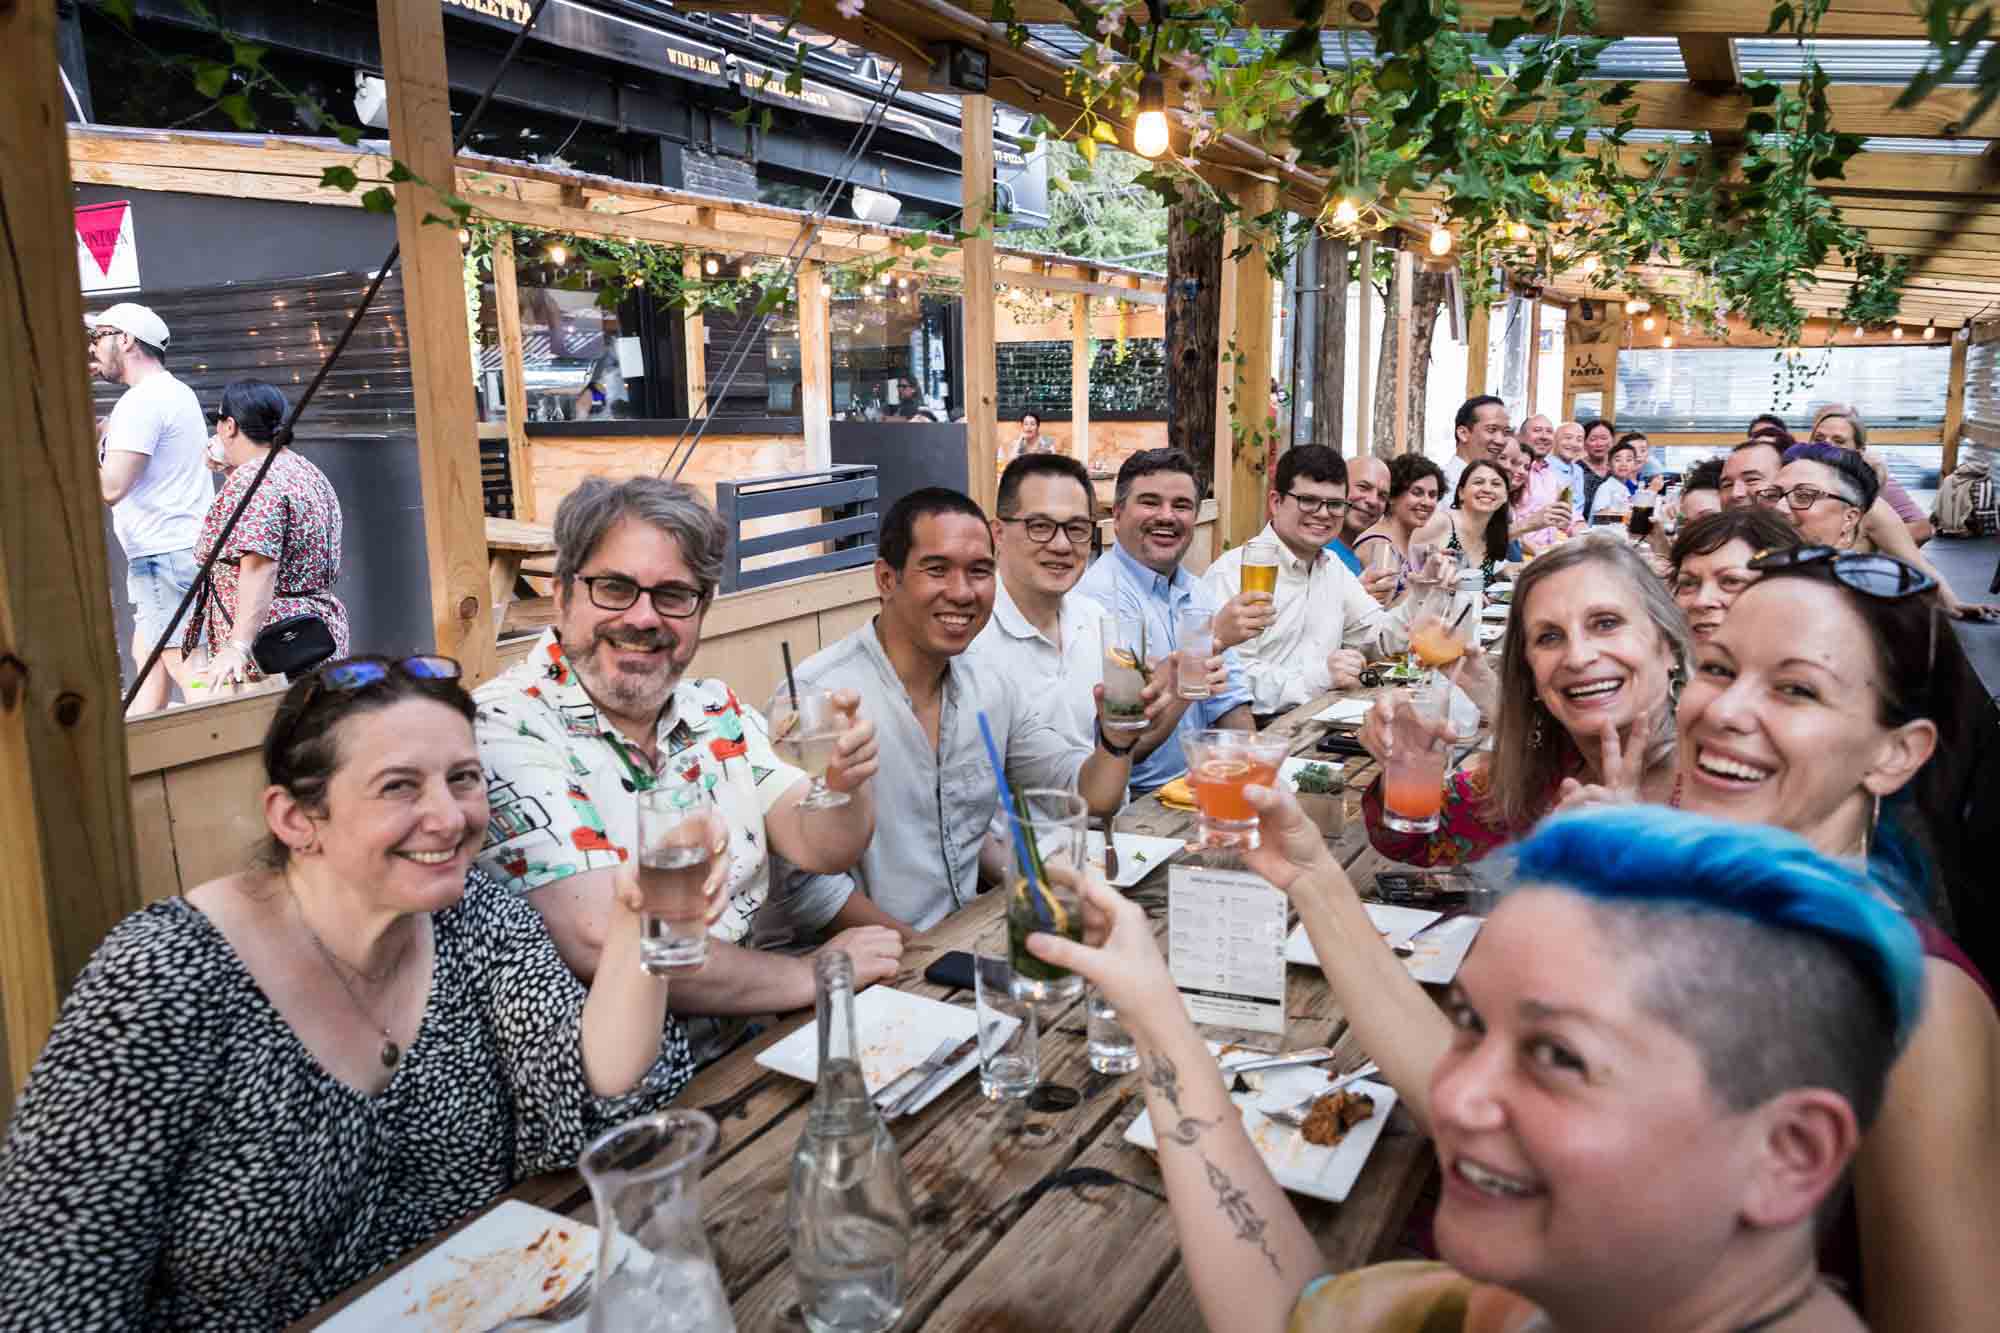 Group photo of seated guests during rehearsal dinner at an outdoor restaurant